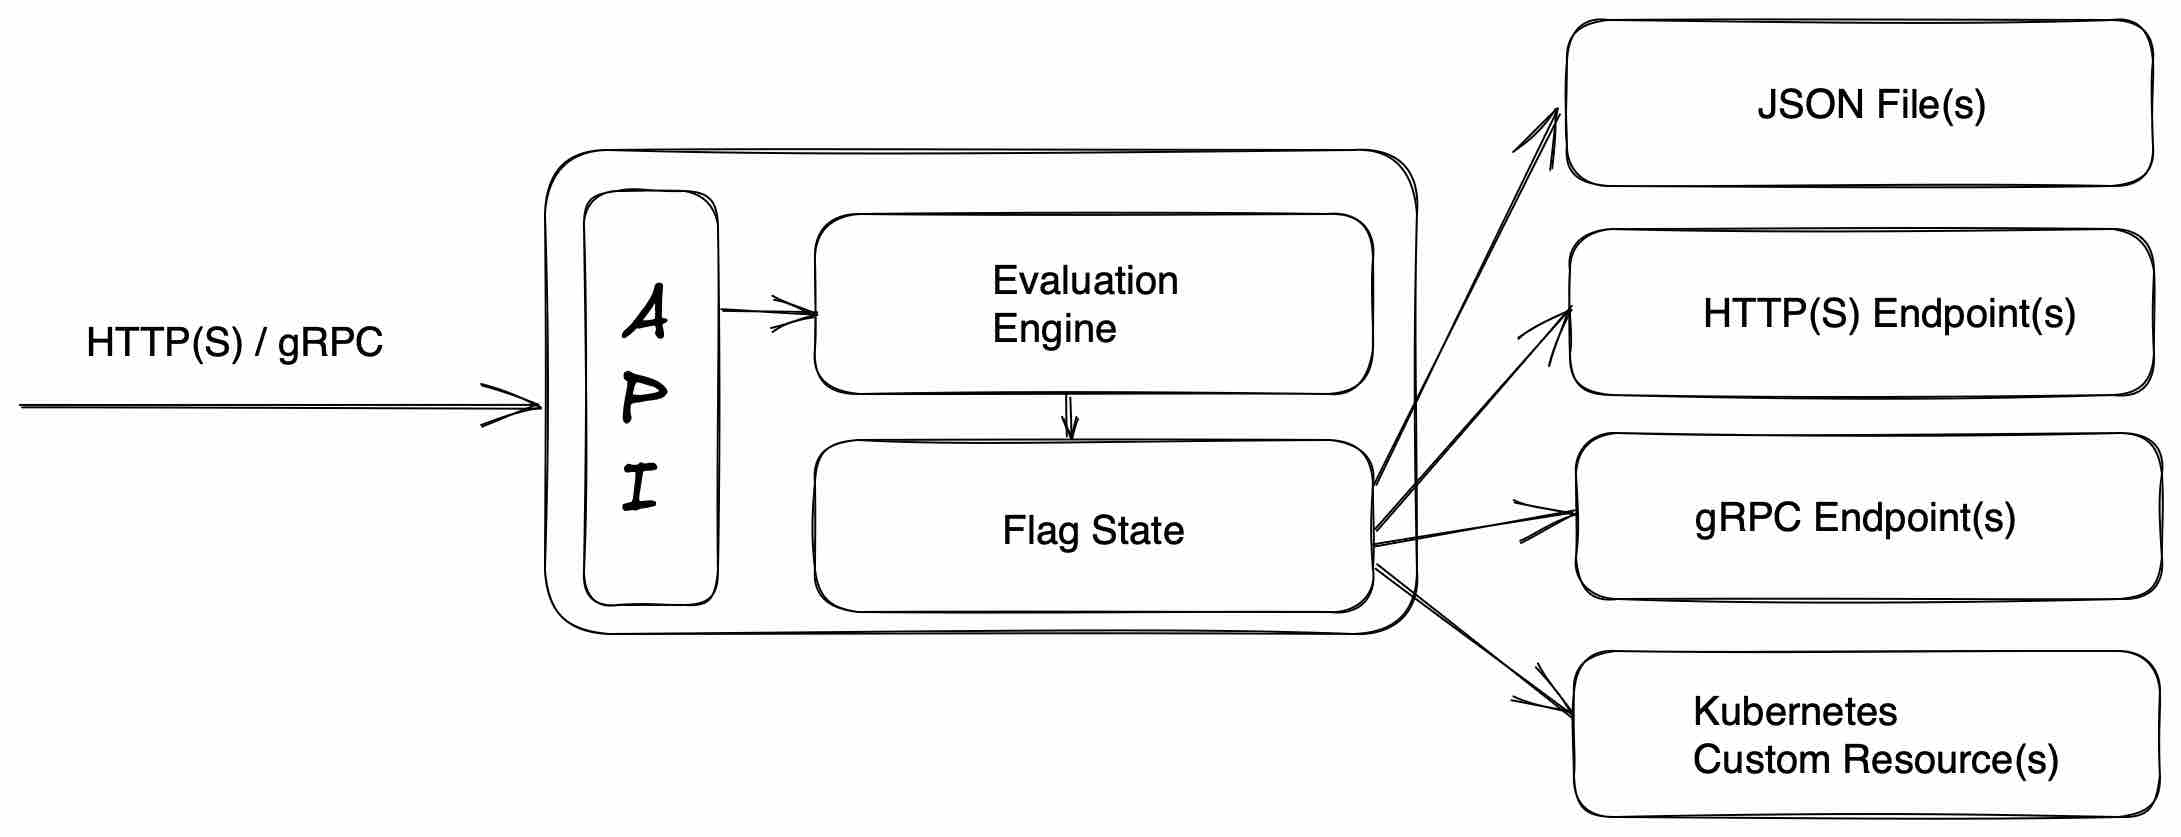 logical architecture of flagd